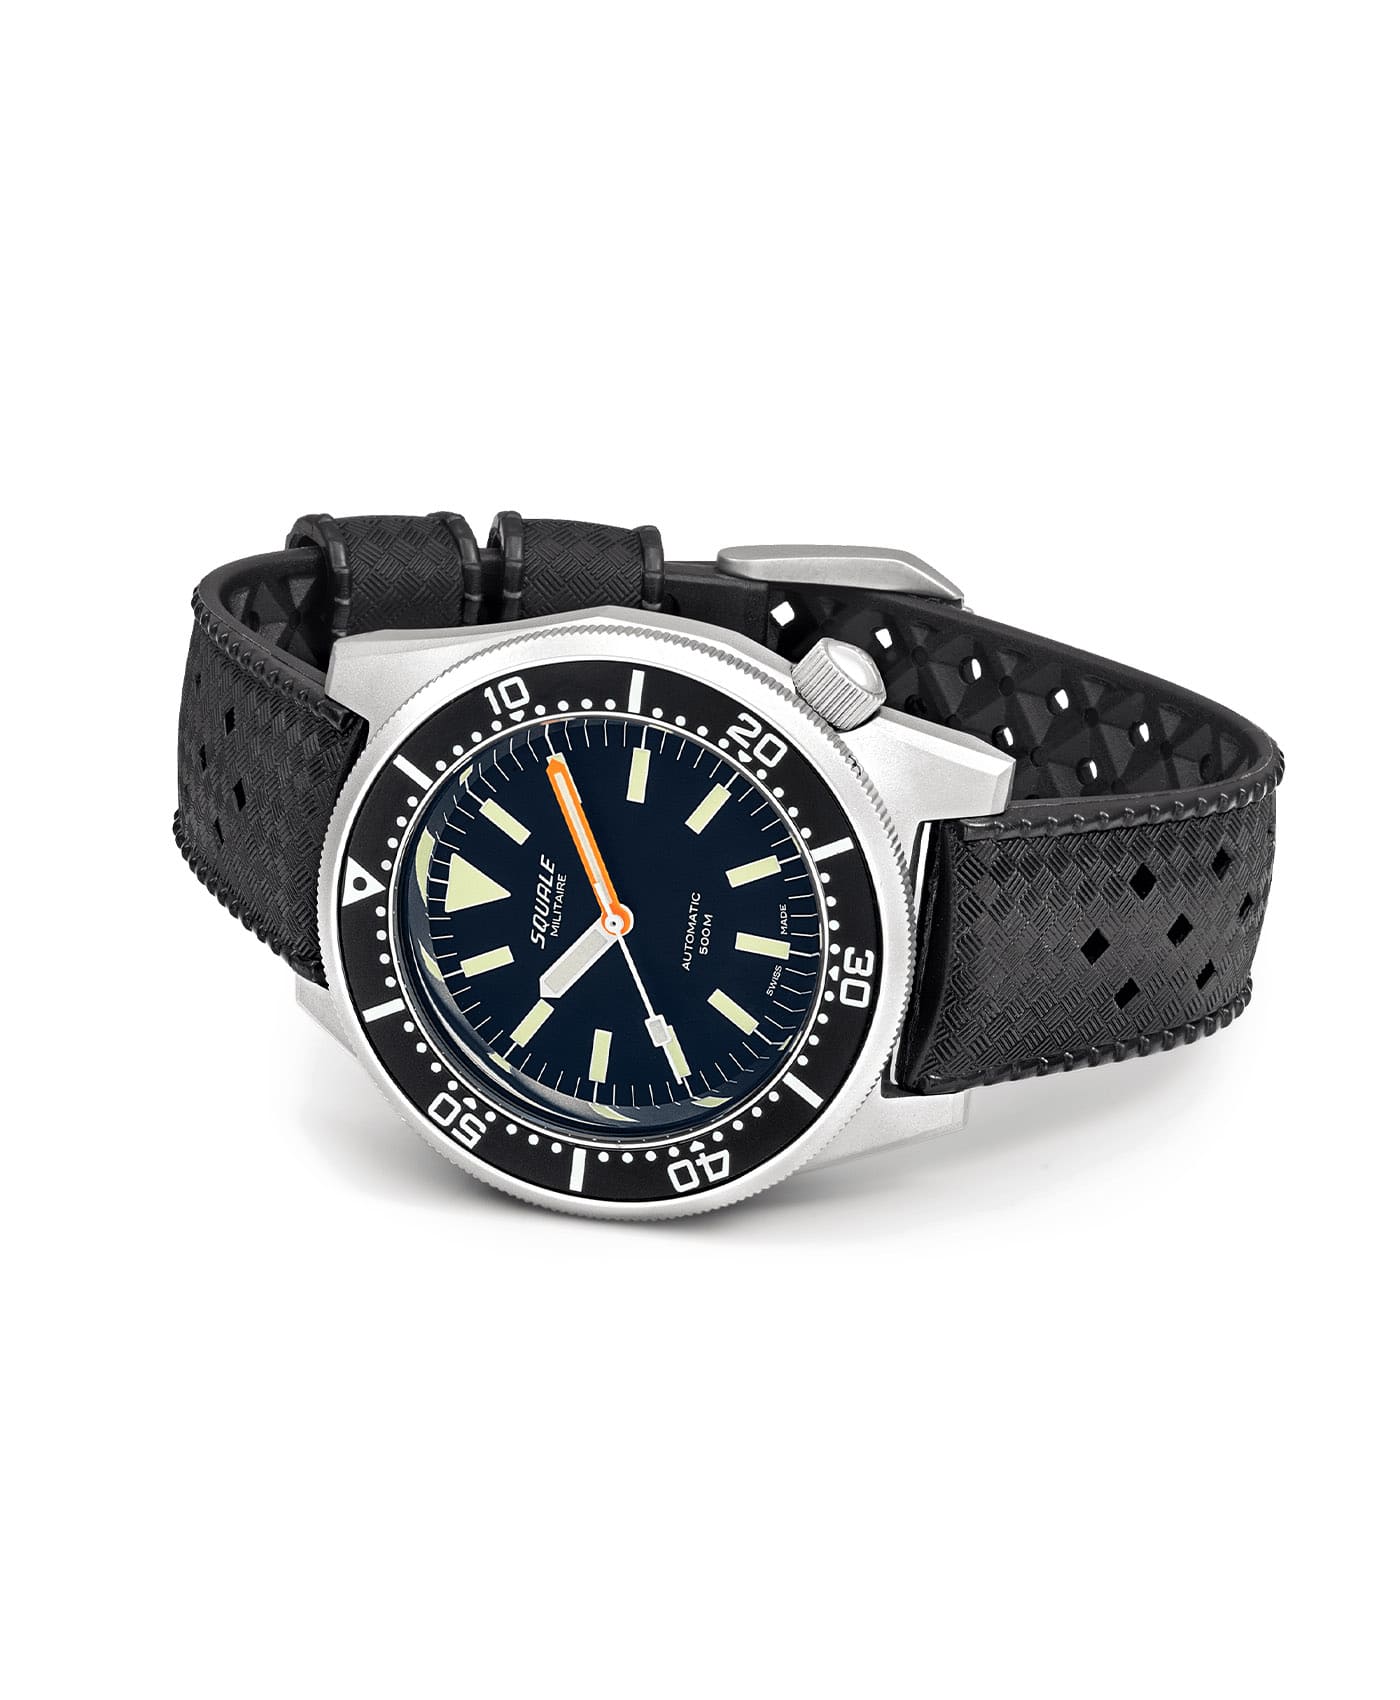 Squale - 1521 Black Militaire - Blasted - Rubber - 1521MILBL.HT-side-min